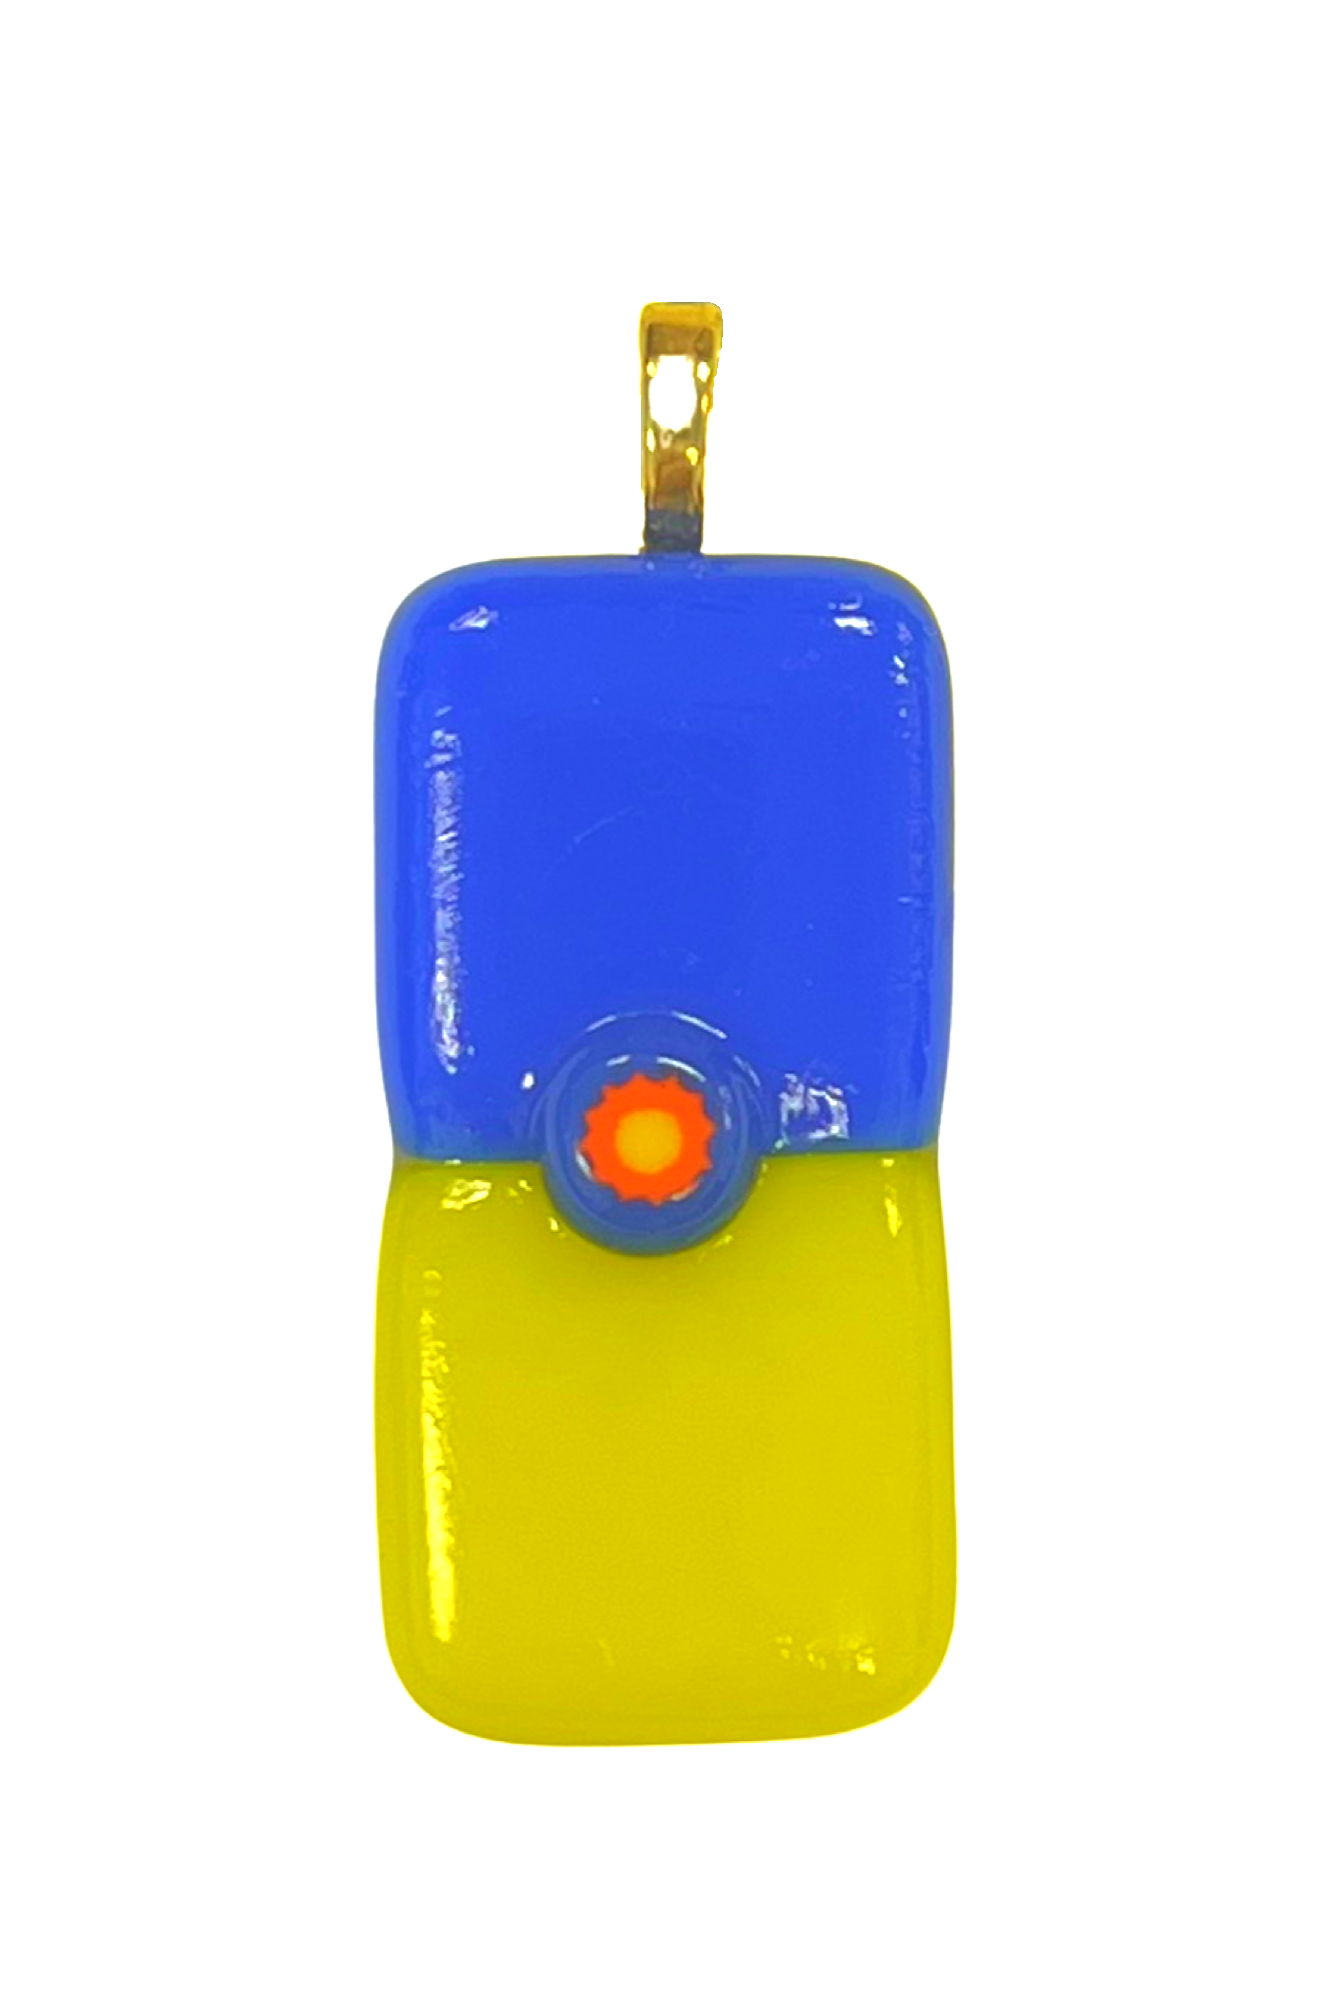 Blue and yellow fused glass pendant. Long